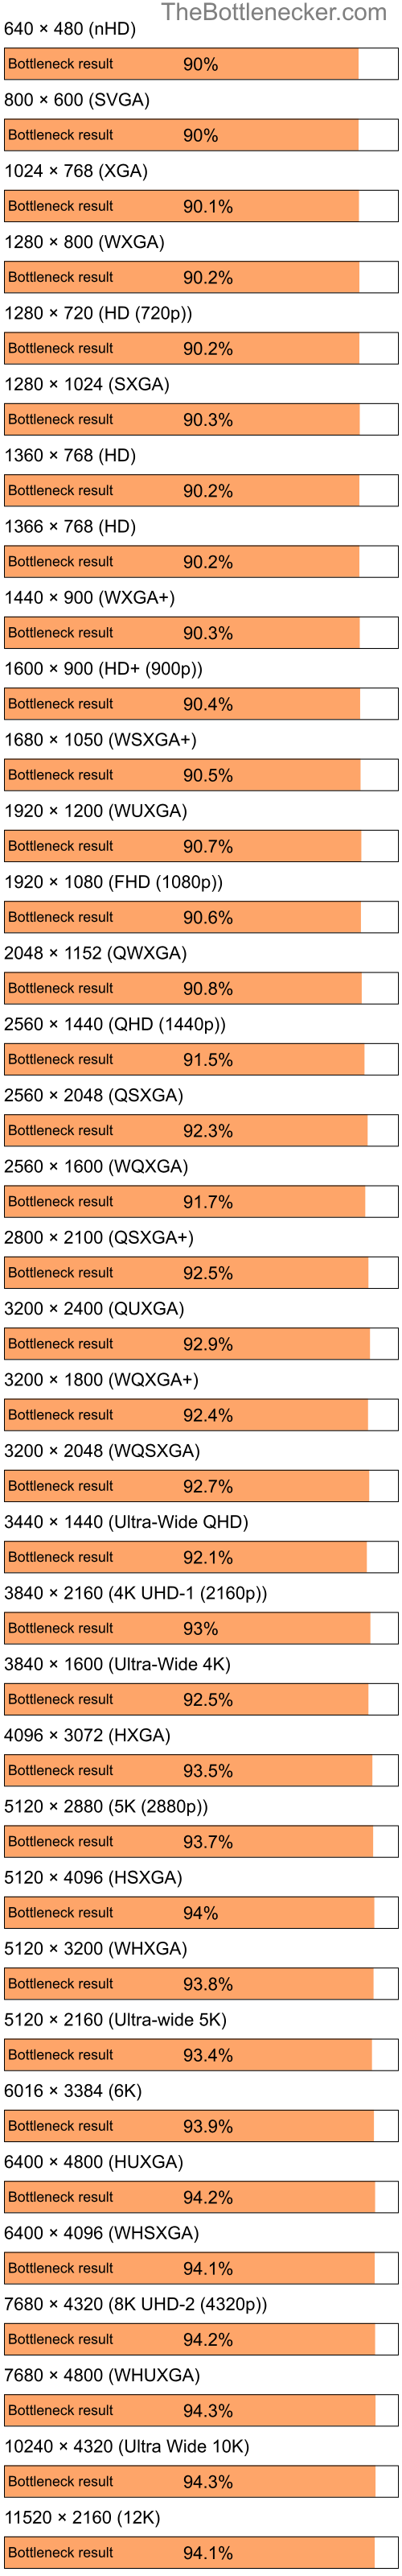 Bottleneck results by resolution for Intel Celeron M 420 and AMD Mobility Radeon 9000 IGP in Graphic Card Intense Tasks